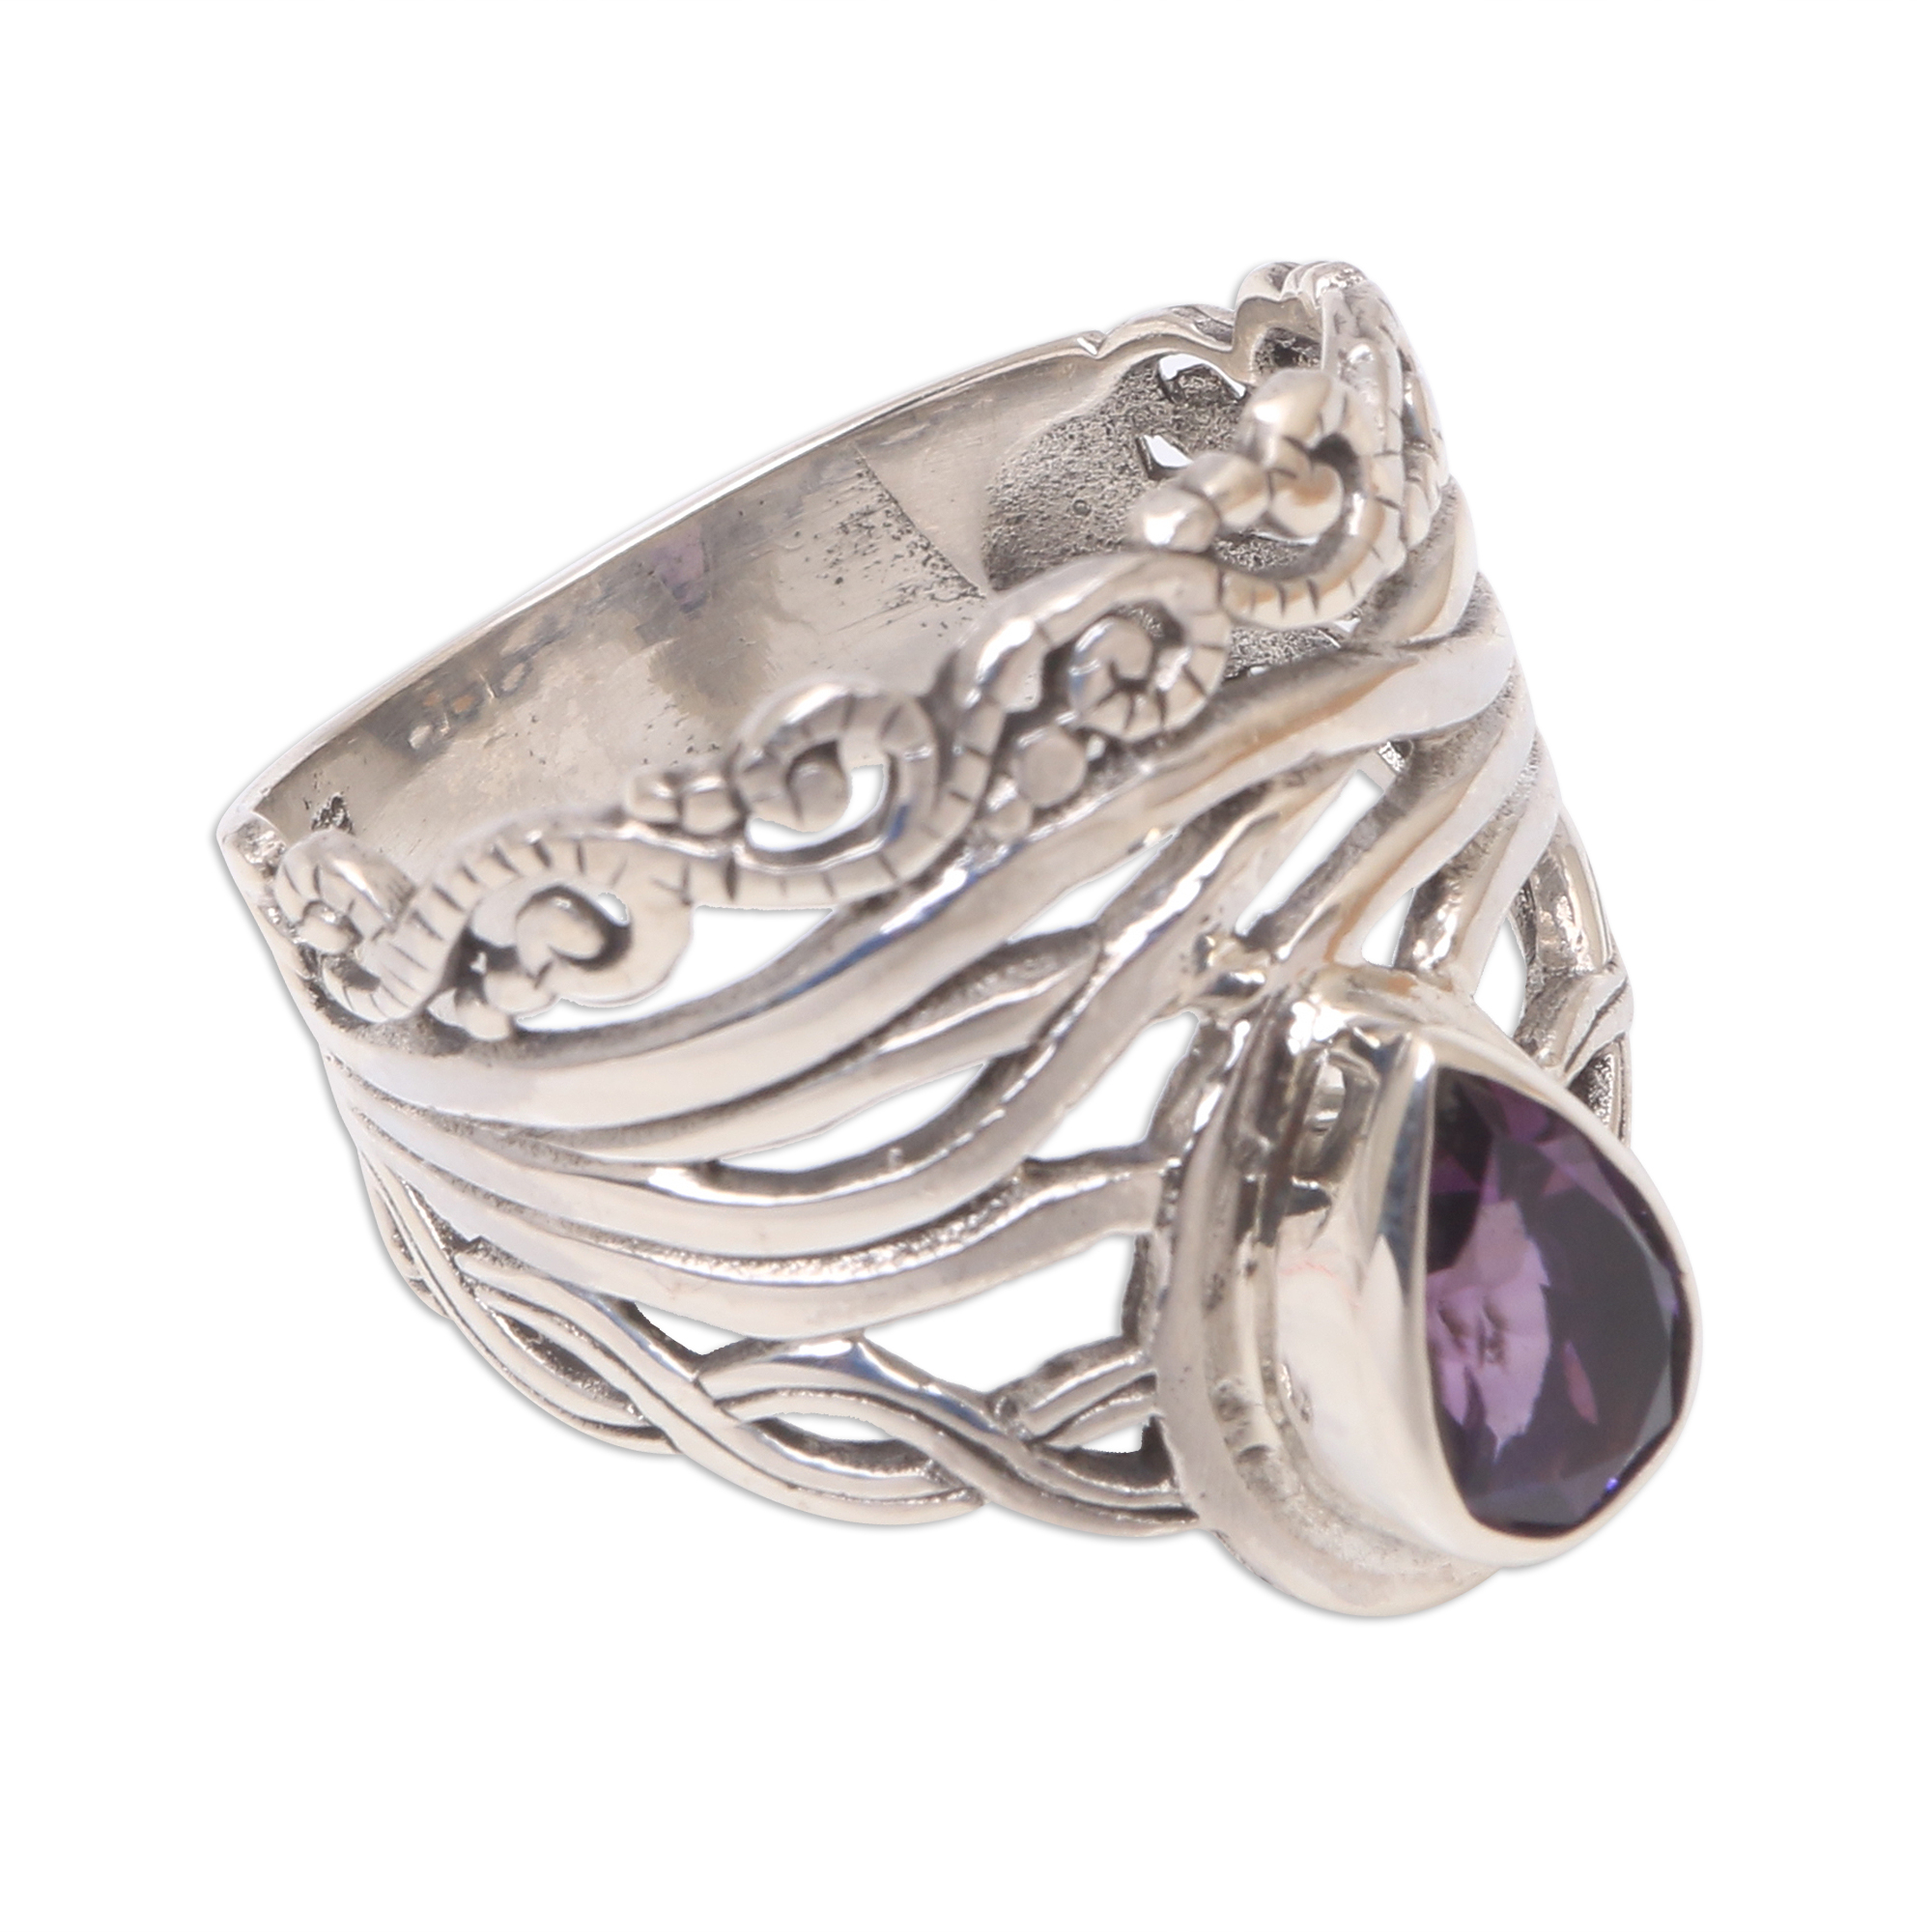 Openwork Amethyst Cocktail Ring Crafted in Bali - Gianyar Sunset | NOVICA